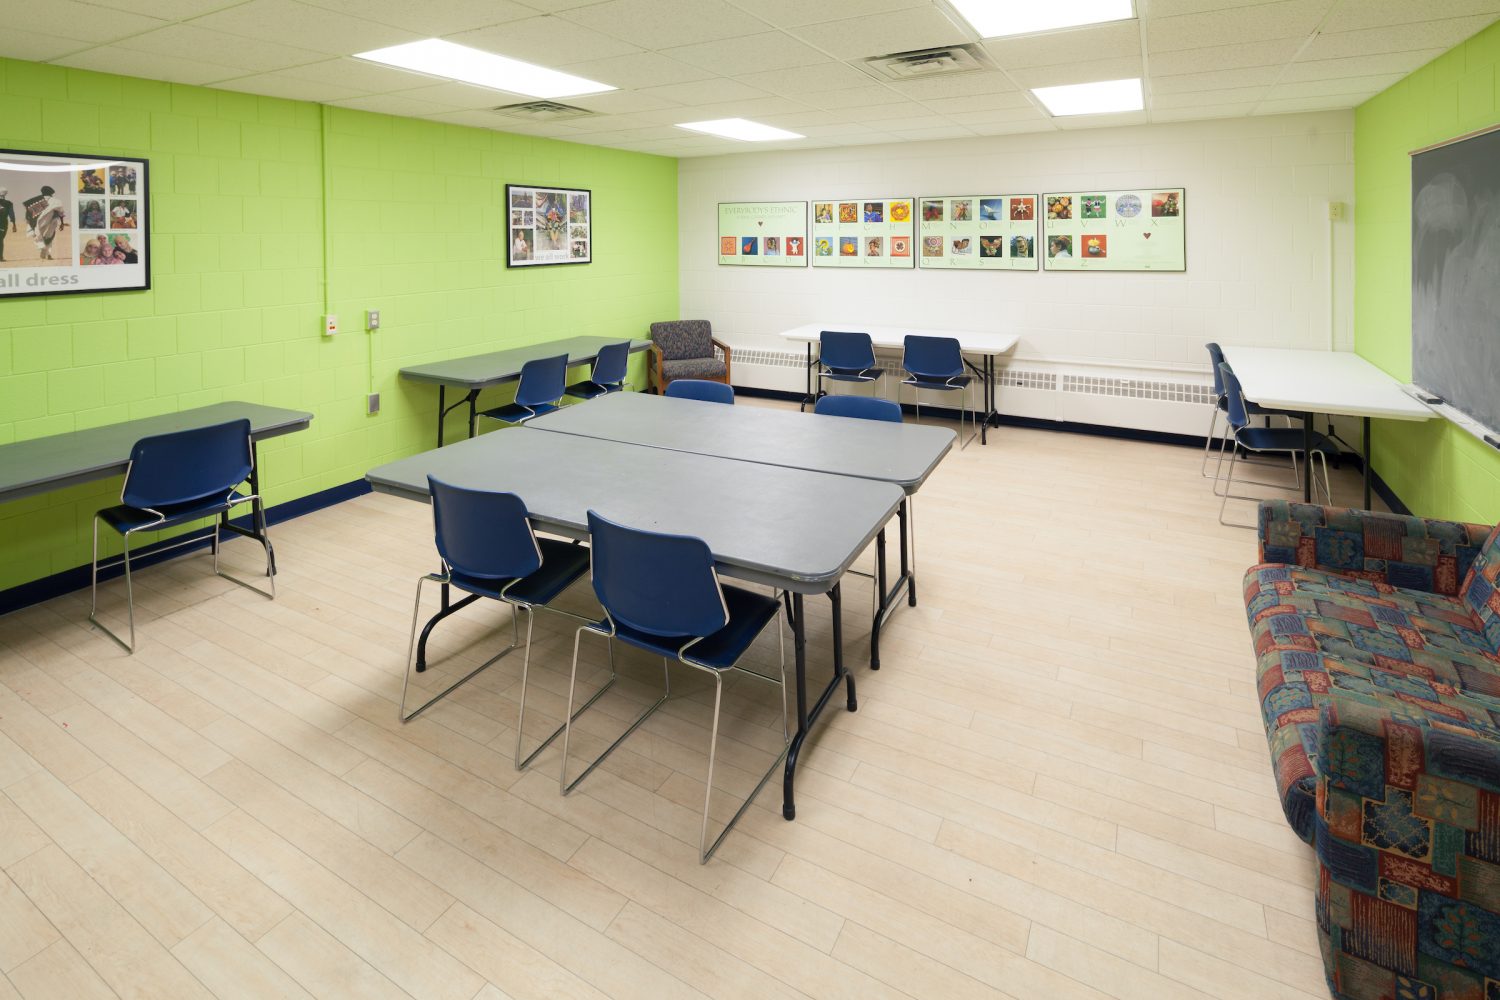 Additional Classroom/Meeting Room located in University Apartments Community Center